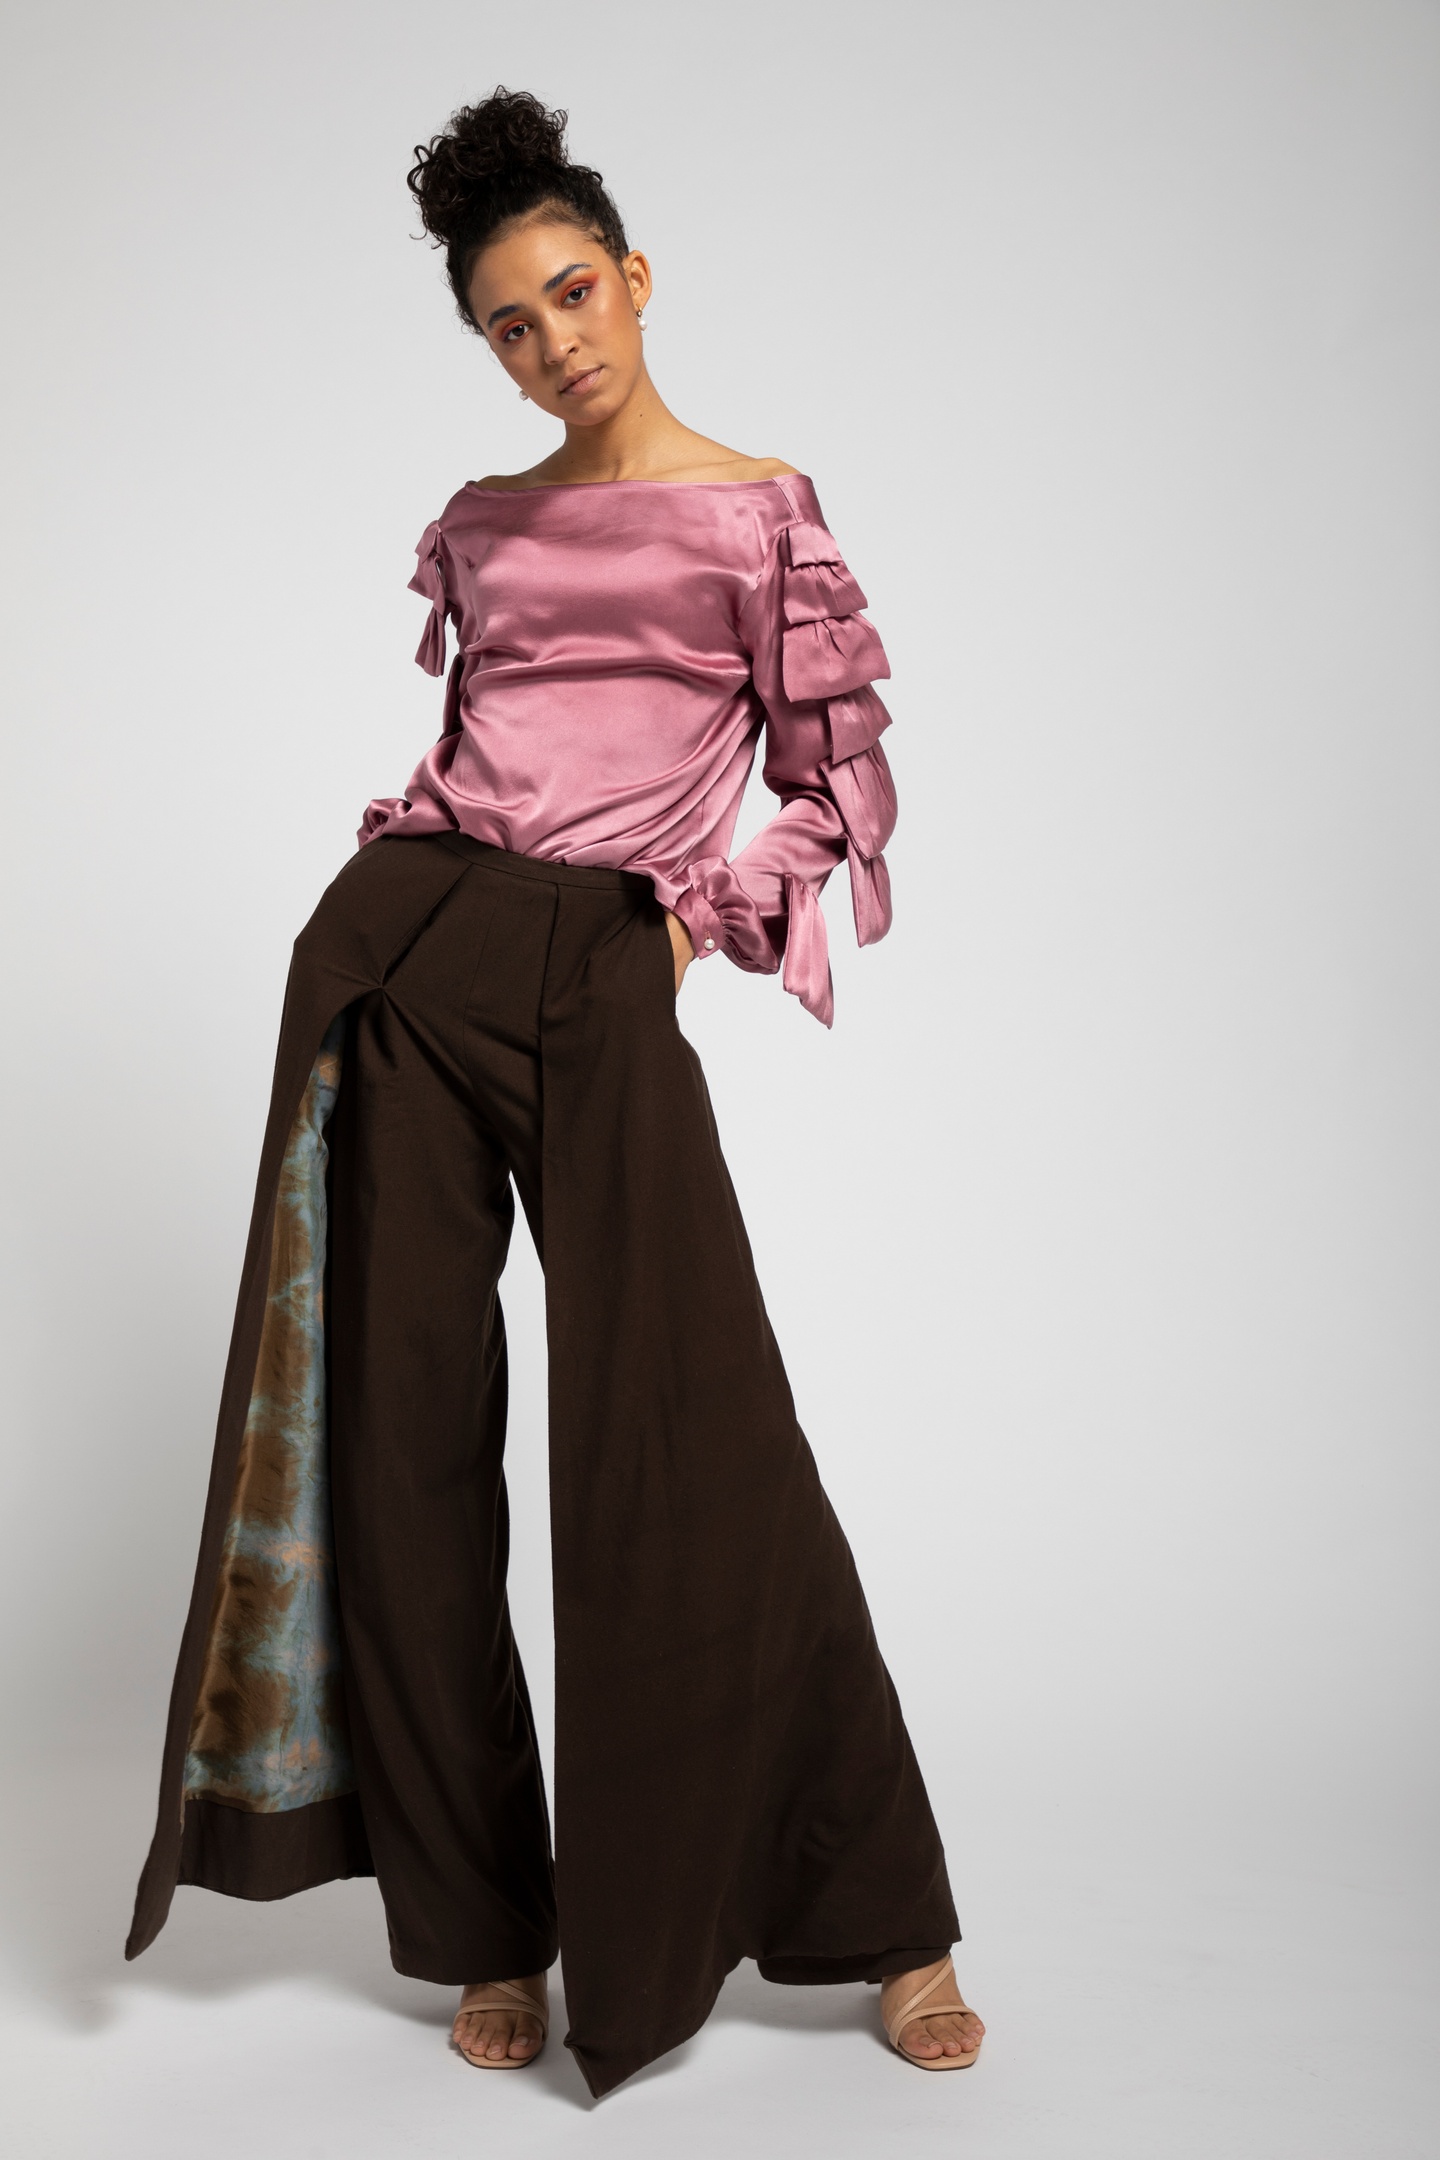 Model in a mauve satin blouse with a wide collar and ruffled long sleeves, paired with dark brown trousers with outer skirted panels lined with a blue and gold patterned satin.